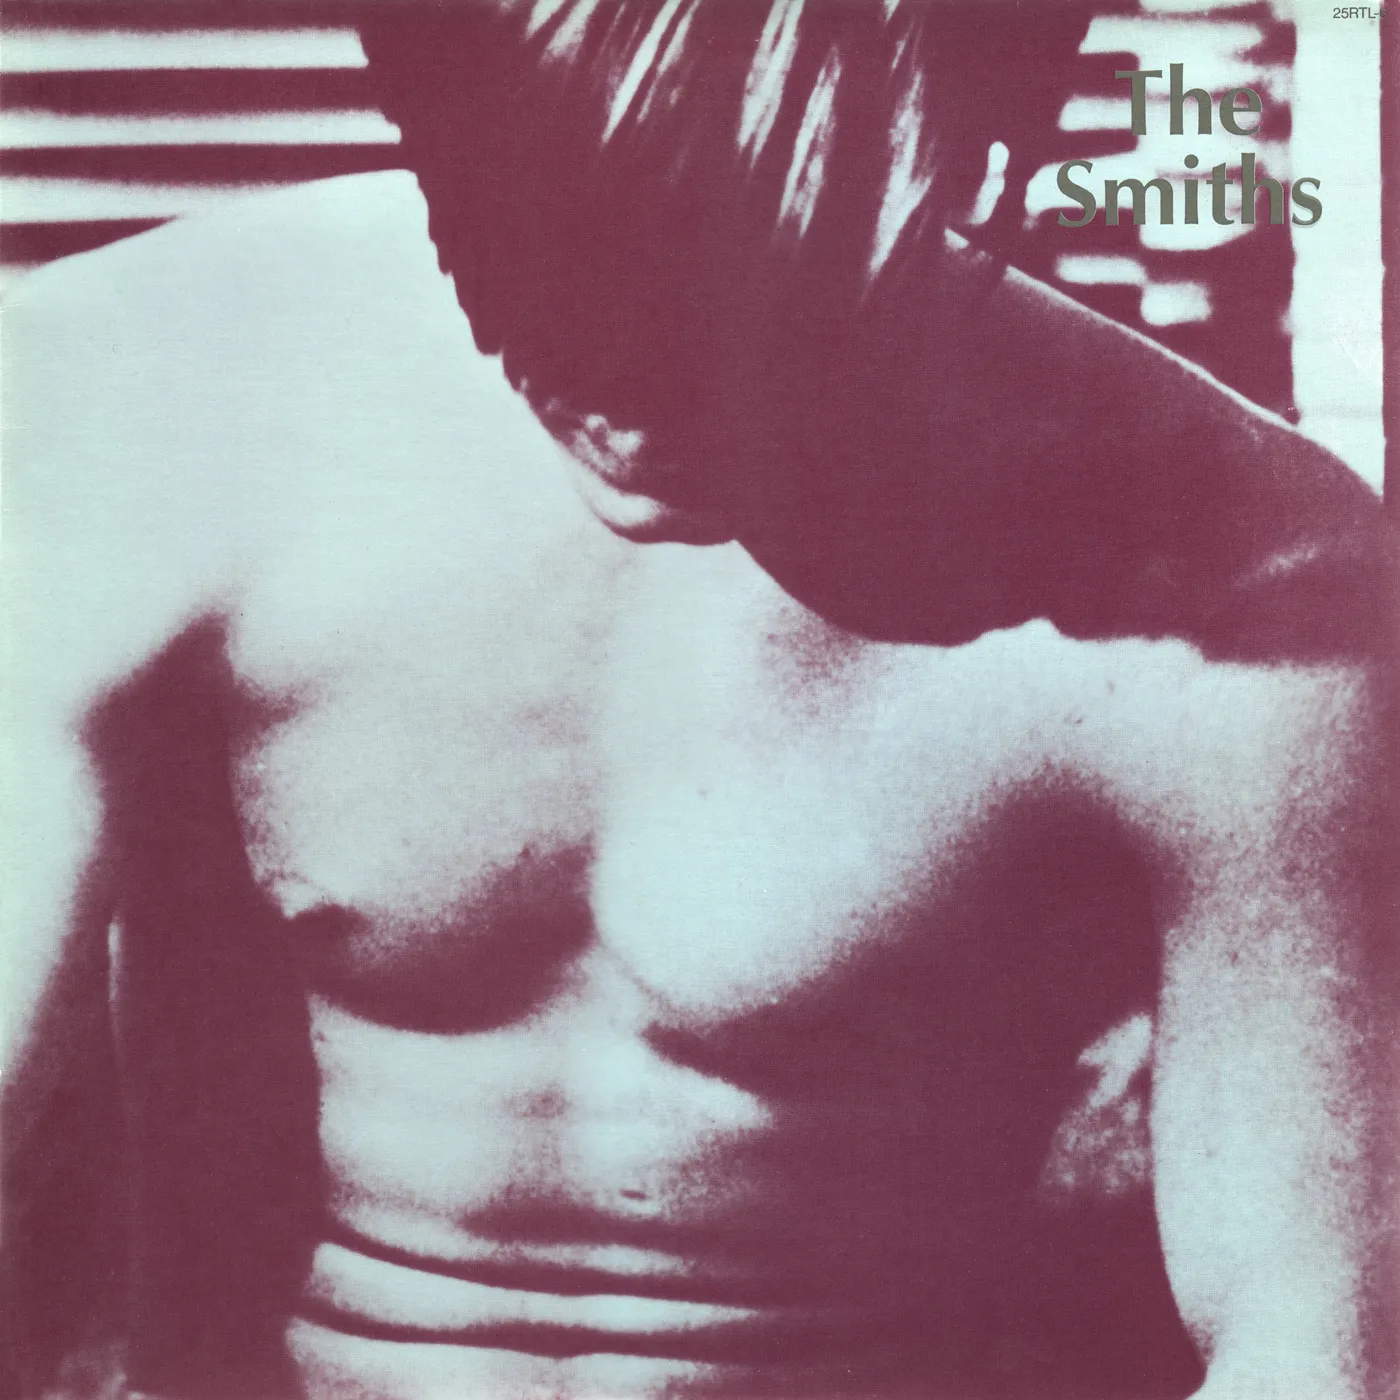 <strong>The Smiths - The Smiths</strong> (Vinyl LP - black)